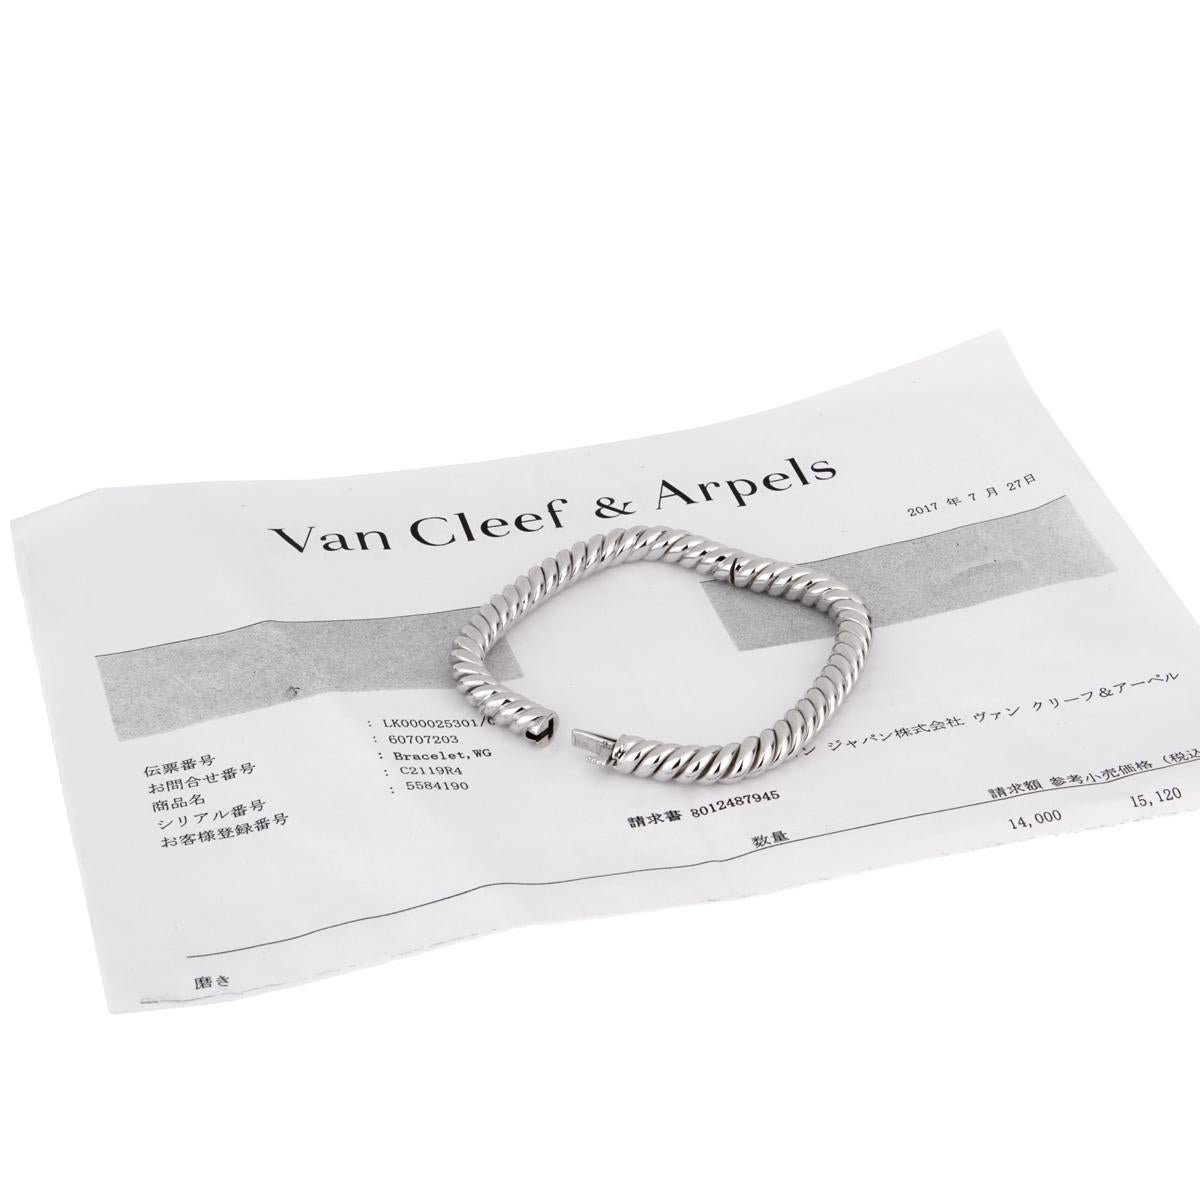 Van Cleef & Arpels Braided White Gold Bangle Bracelet In Excellent Condition For Sale In Feasterville, PA